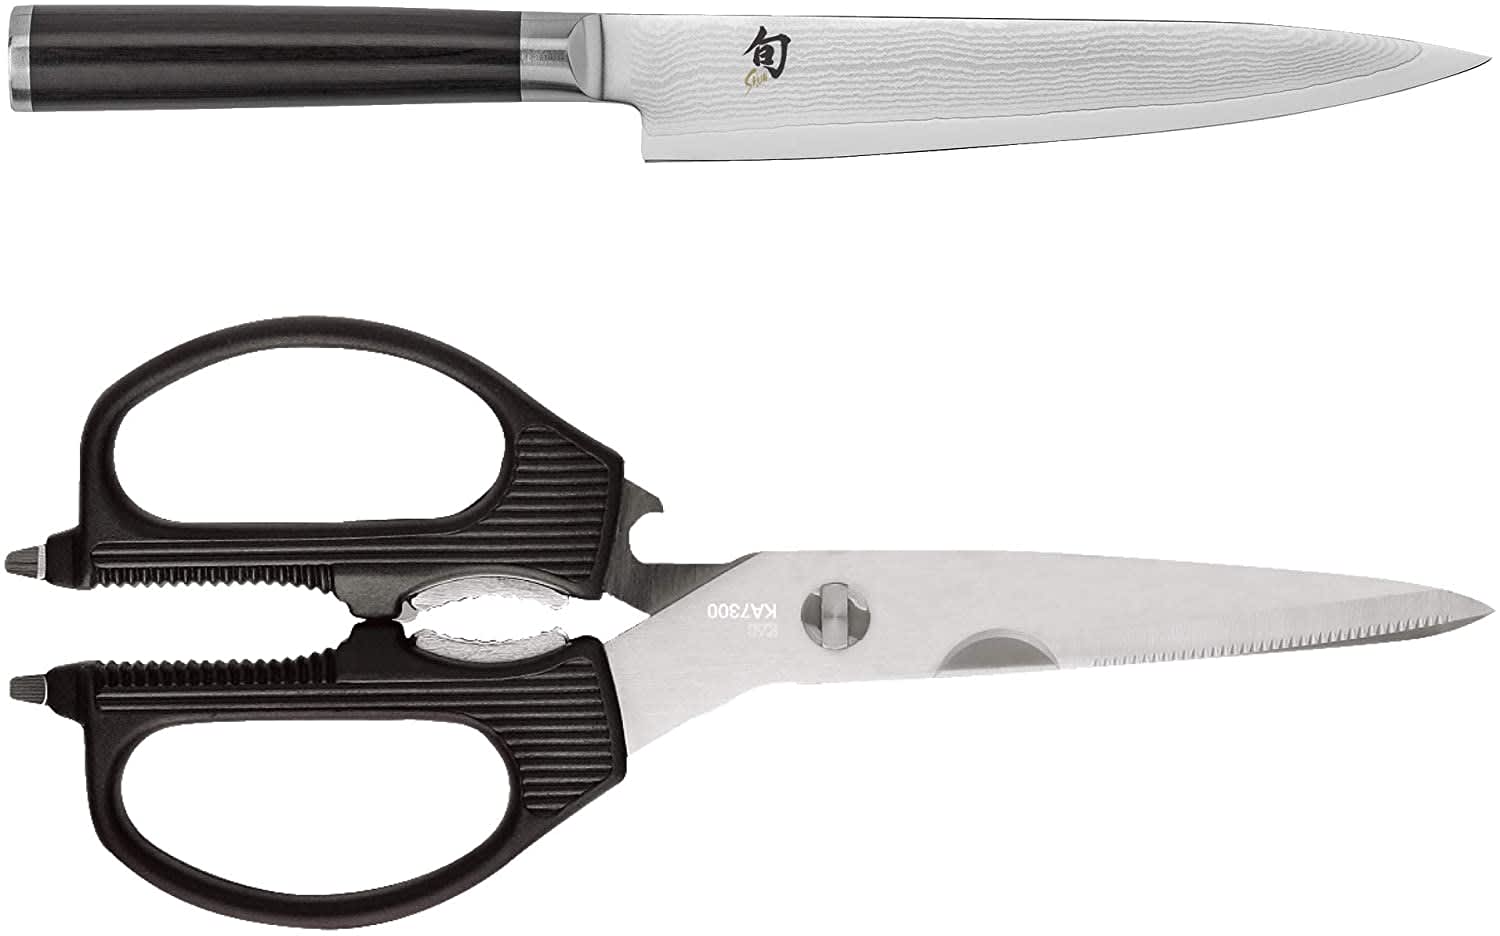 http://cdn.apartmenttherapy.info/image/upload/v1631025591/gen-workflow/product-database/Shun_Classic_6_inch_Utility_Knife_and_Kai_Shears_Set_Silver.jpg